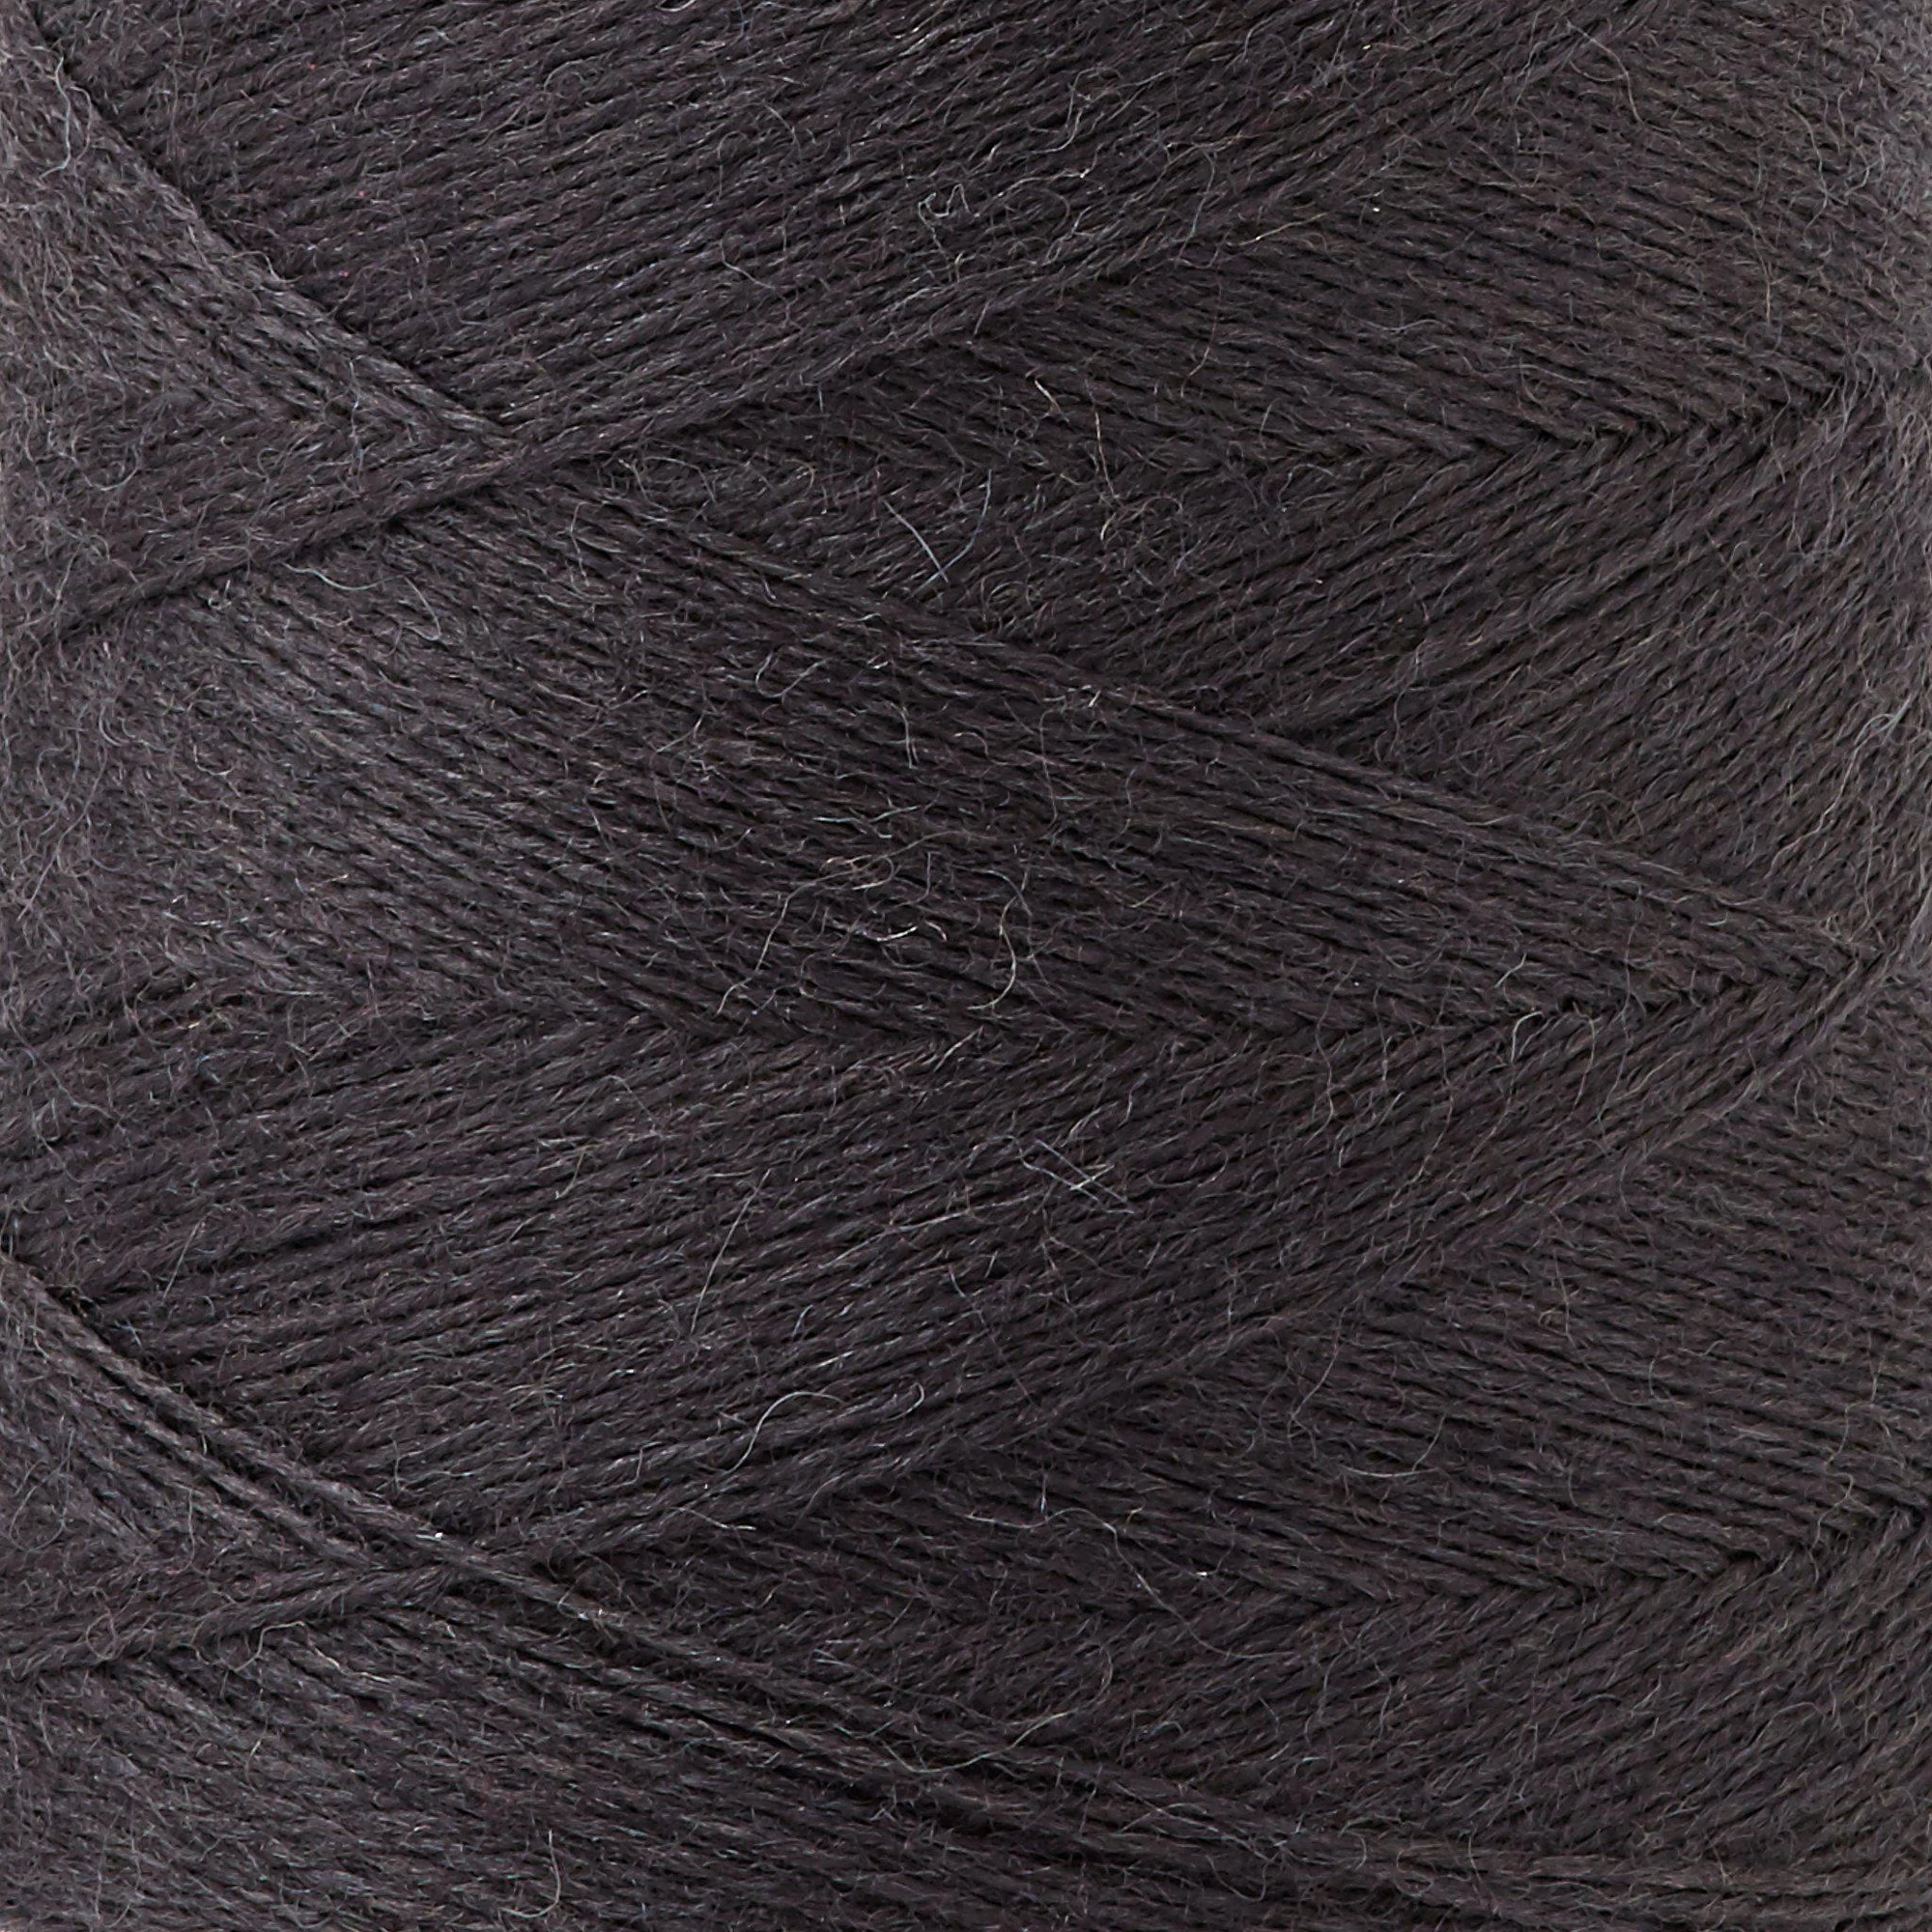 Natural Cotton Seine Twine # 12 Warp Weaving Yarn for Rugs and Tapestr -  Gist Yarn